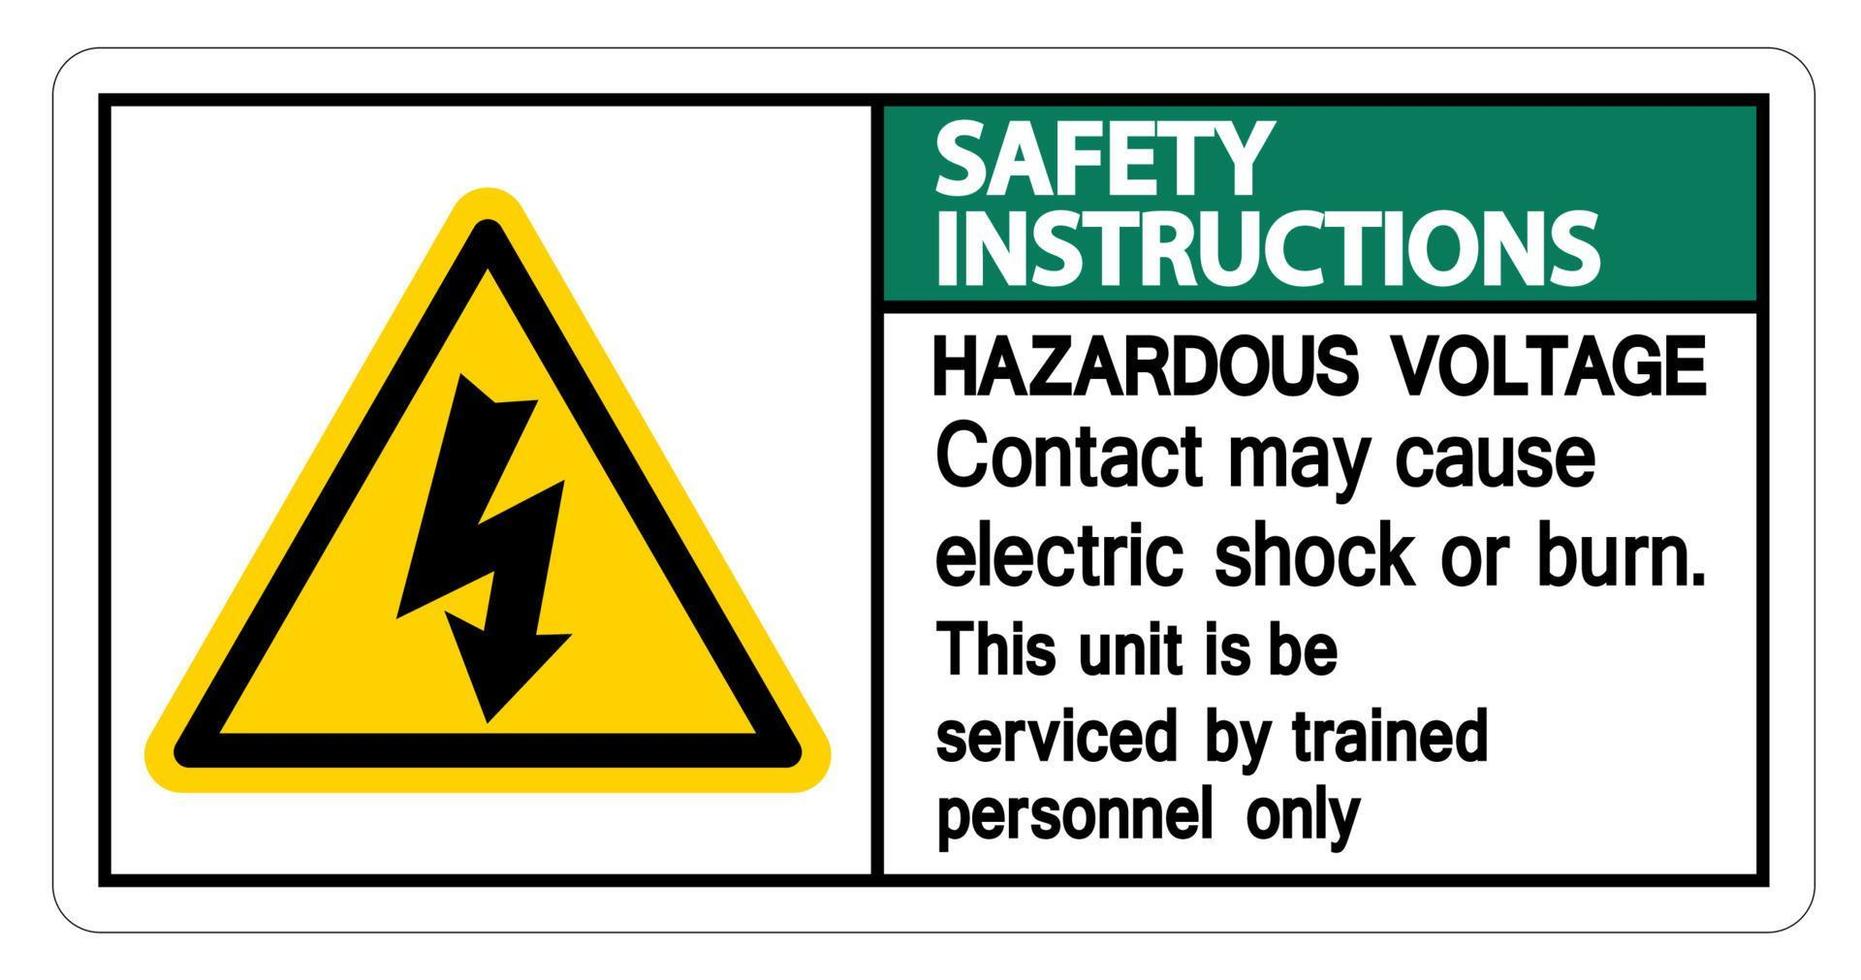 Safety instructions Hazardous Voltage Contact May Cause Electric Shock Or Burn Sign On White Background vector